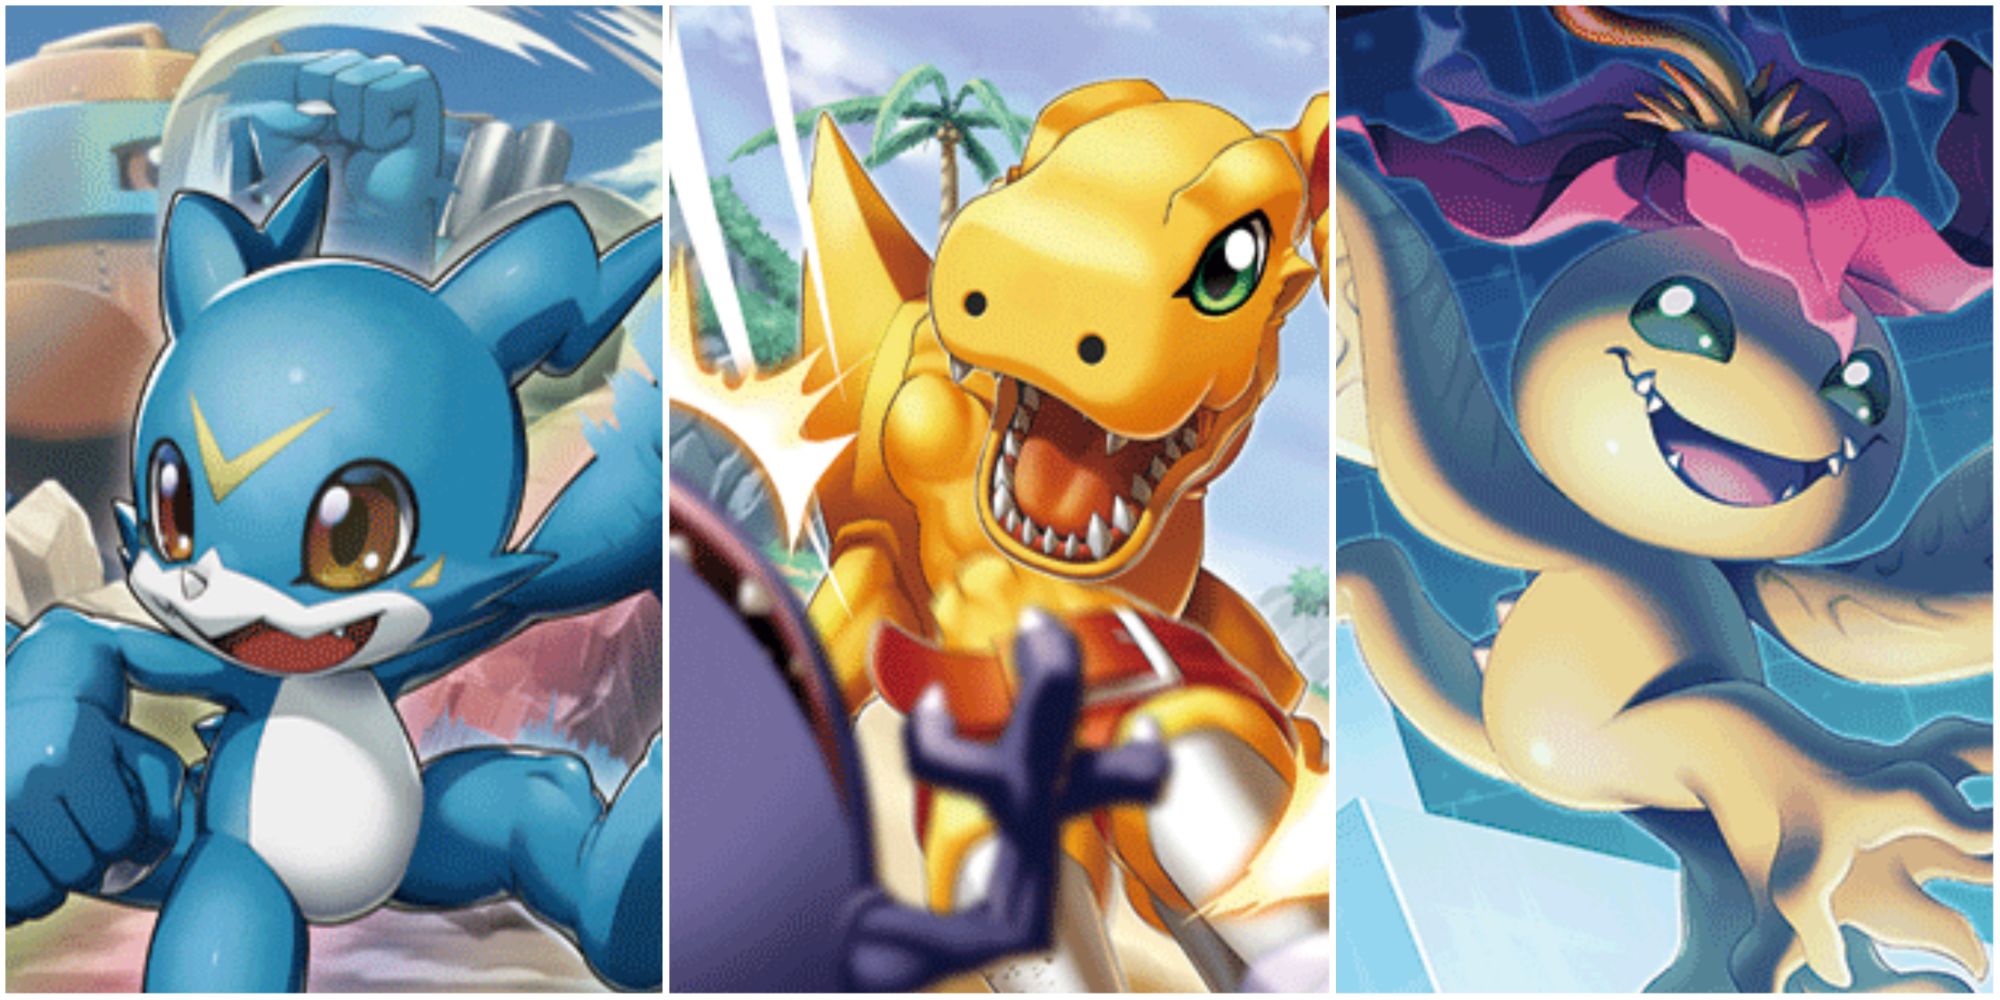 veemon, agumon, palmon in collage from digimon card game